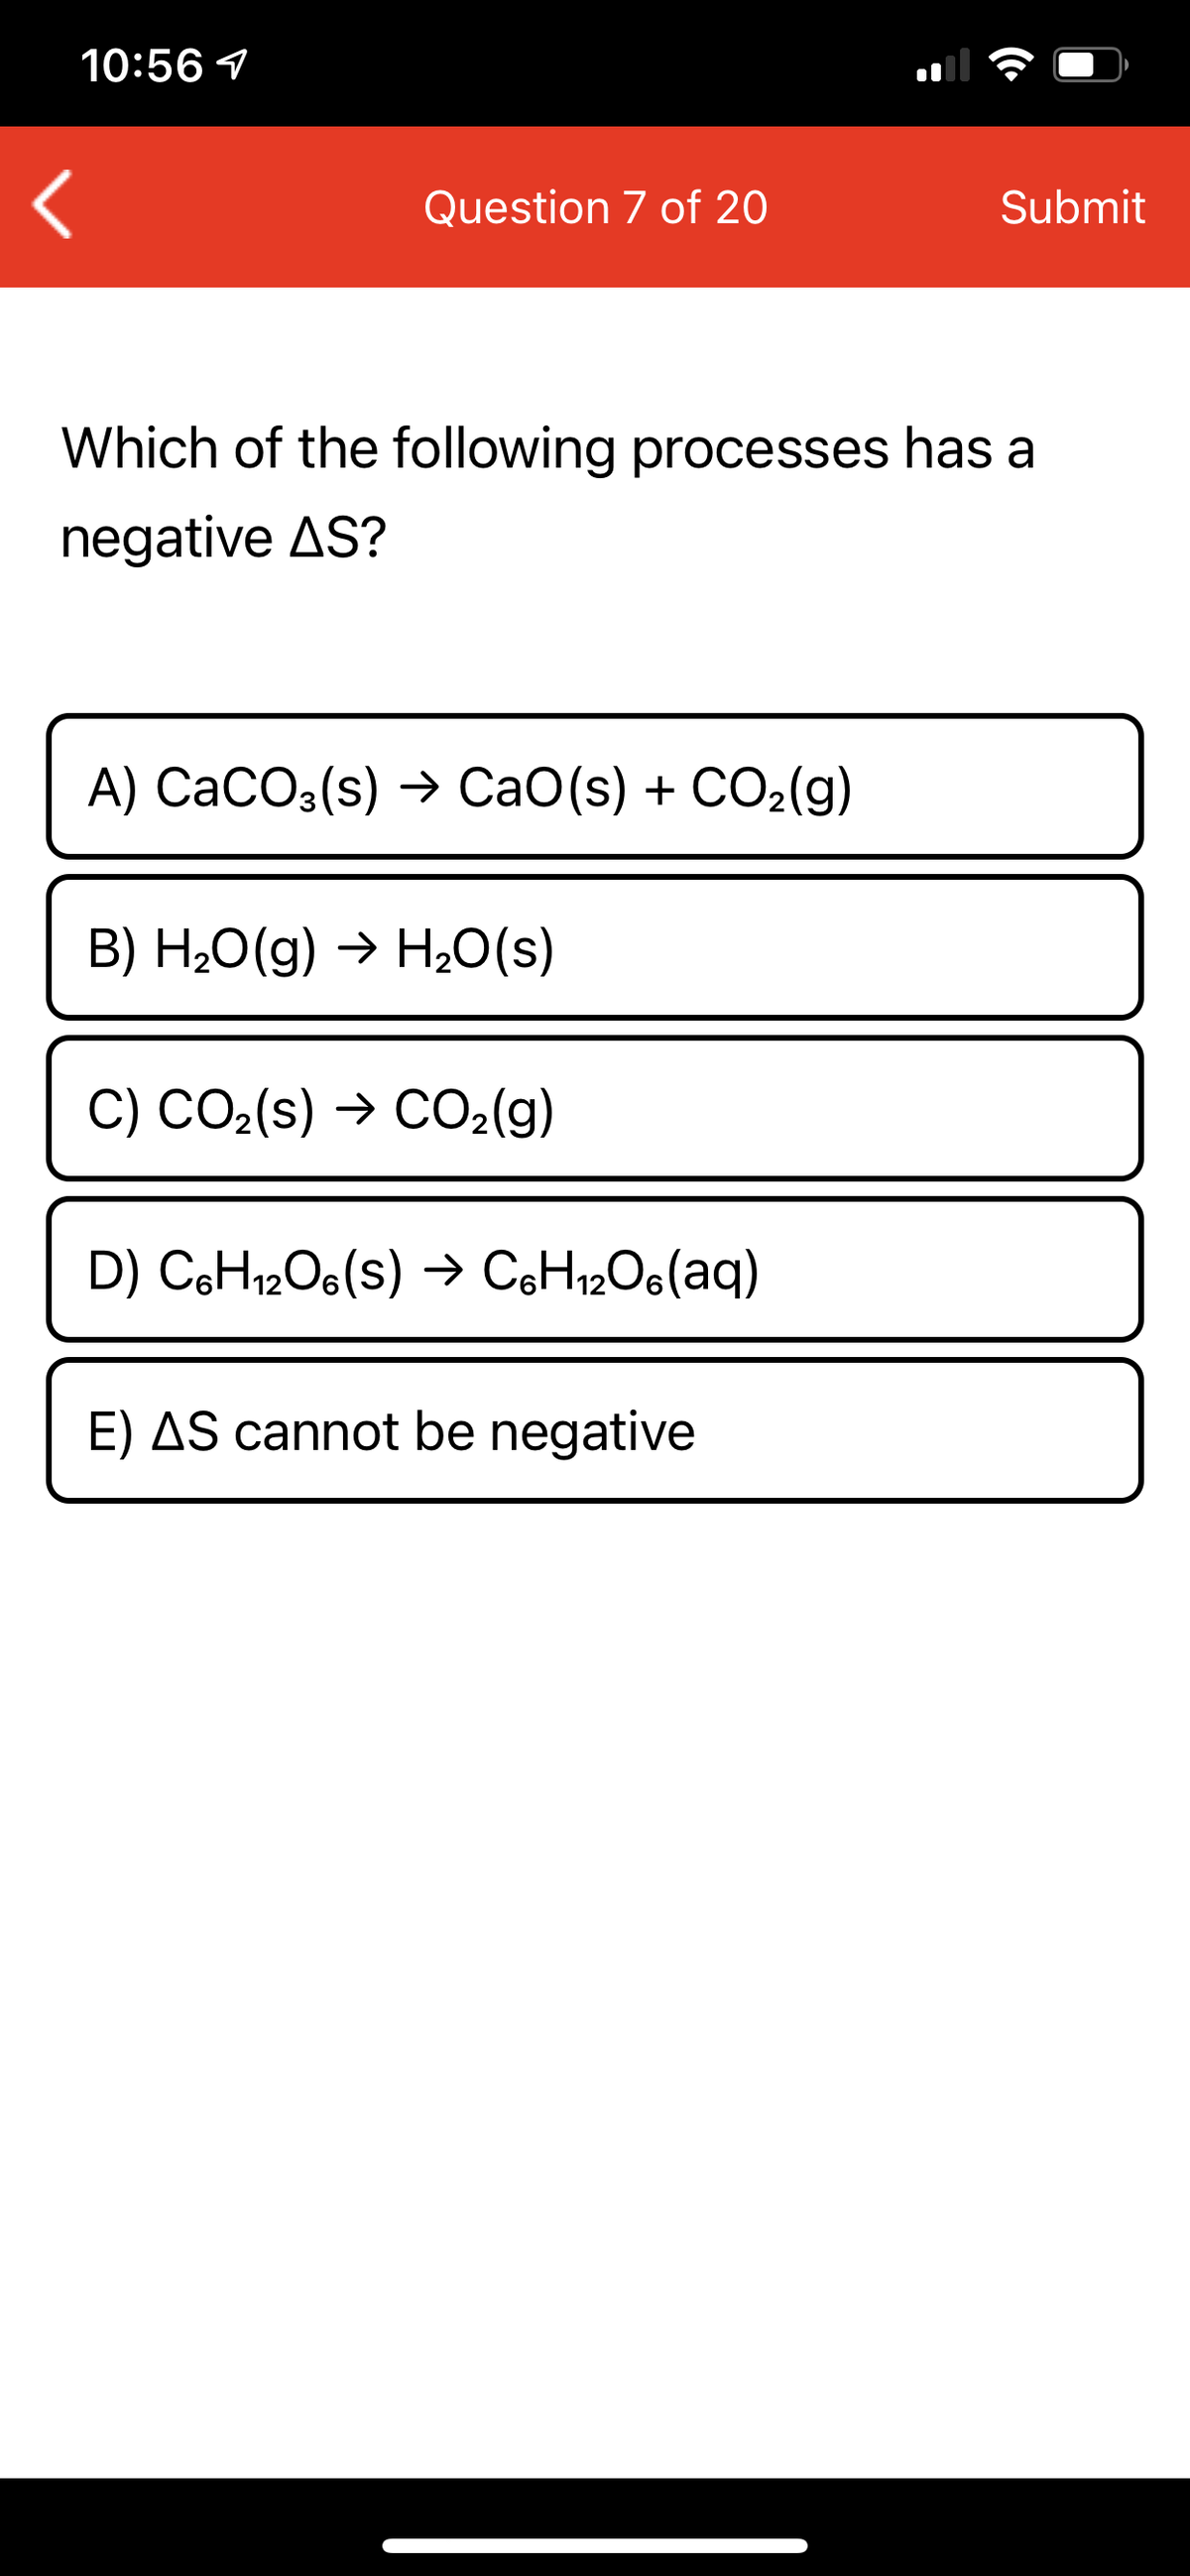 10:56 1
Question 7 of 20
Submit
Which of the following processes has a
negative AS?
A) CaCO3(s) → CaO(s) + CO2(g)
B) H,0(g) → H20(s)
C) CO2(s) → CO2(g)
D) CH12O6(s) → CoH12O6(aq)
E) AS cannot be negative
